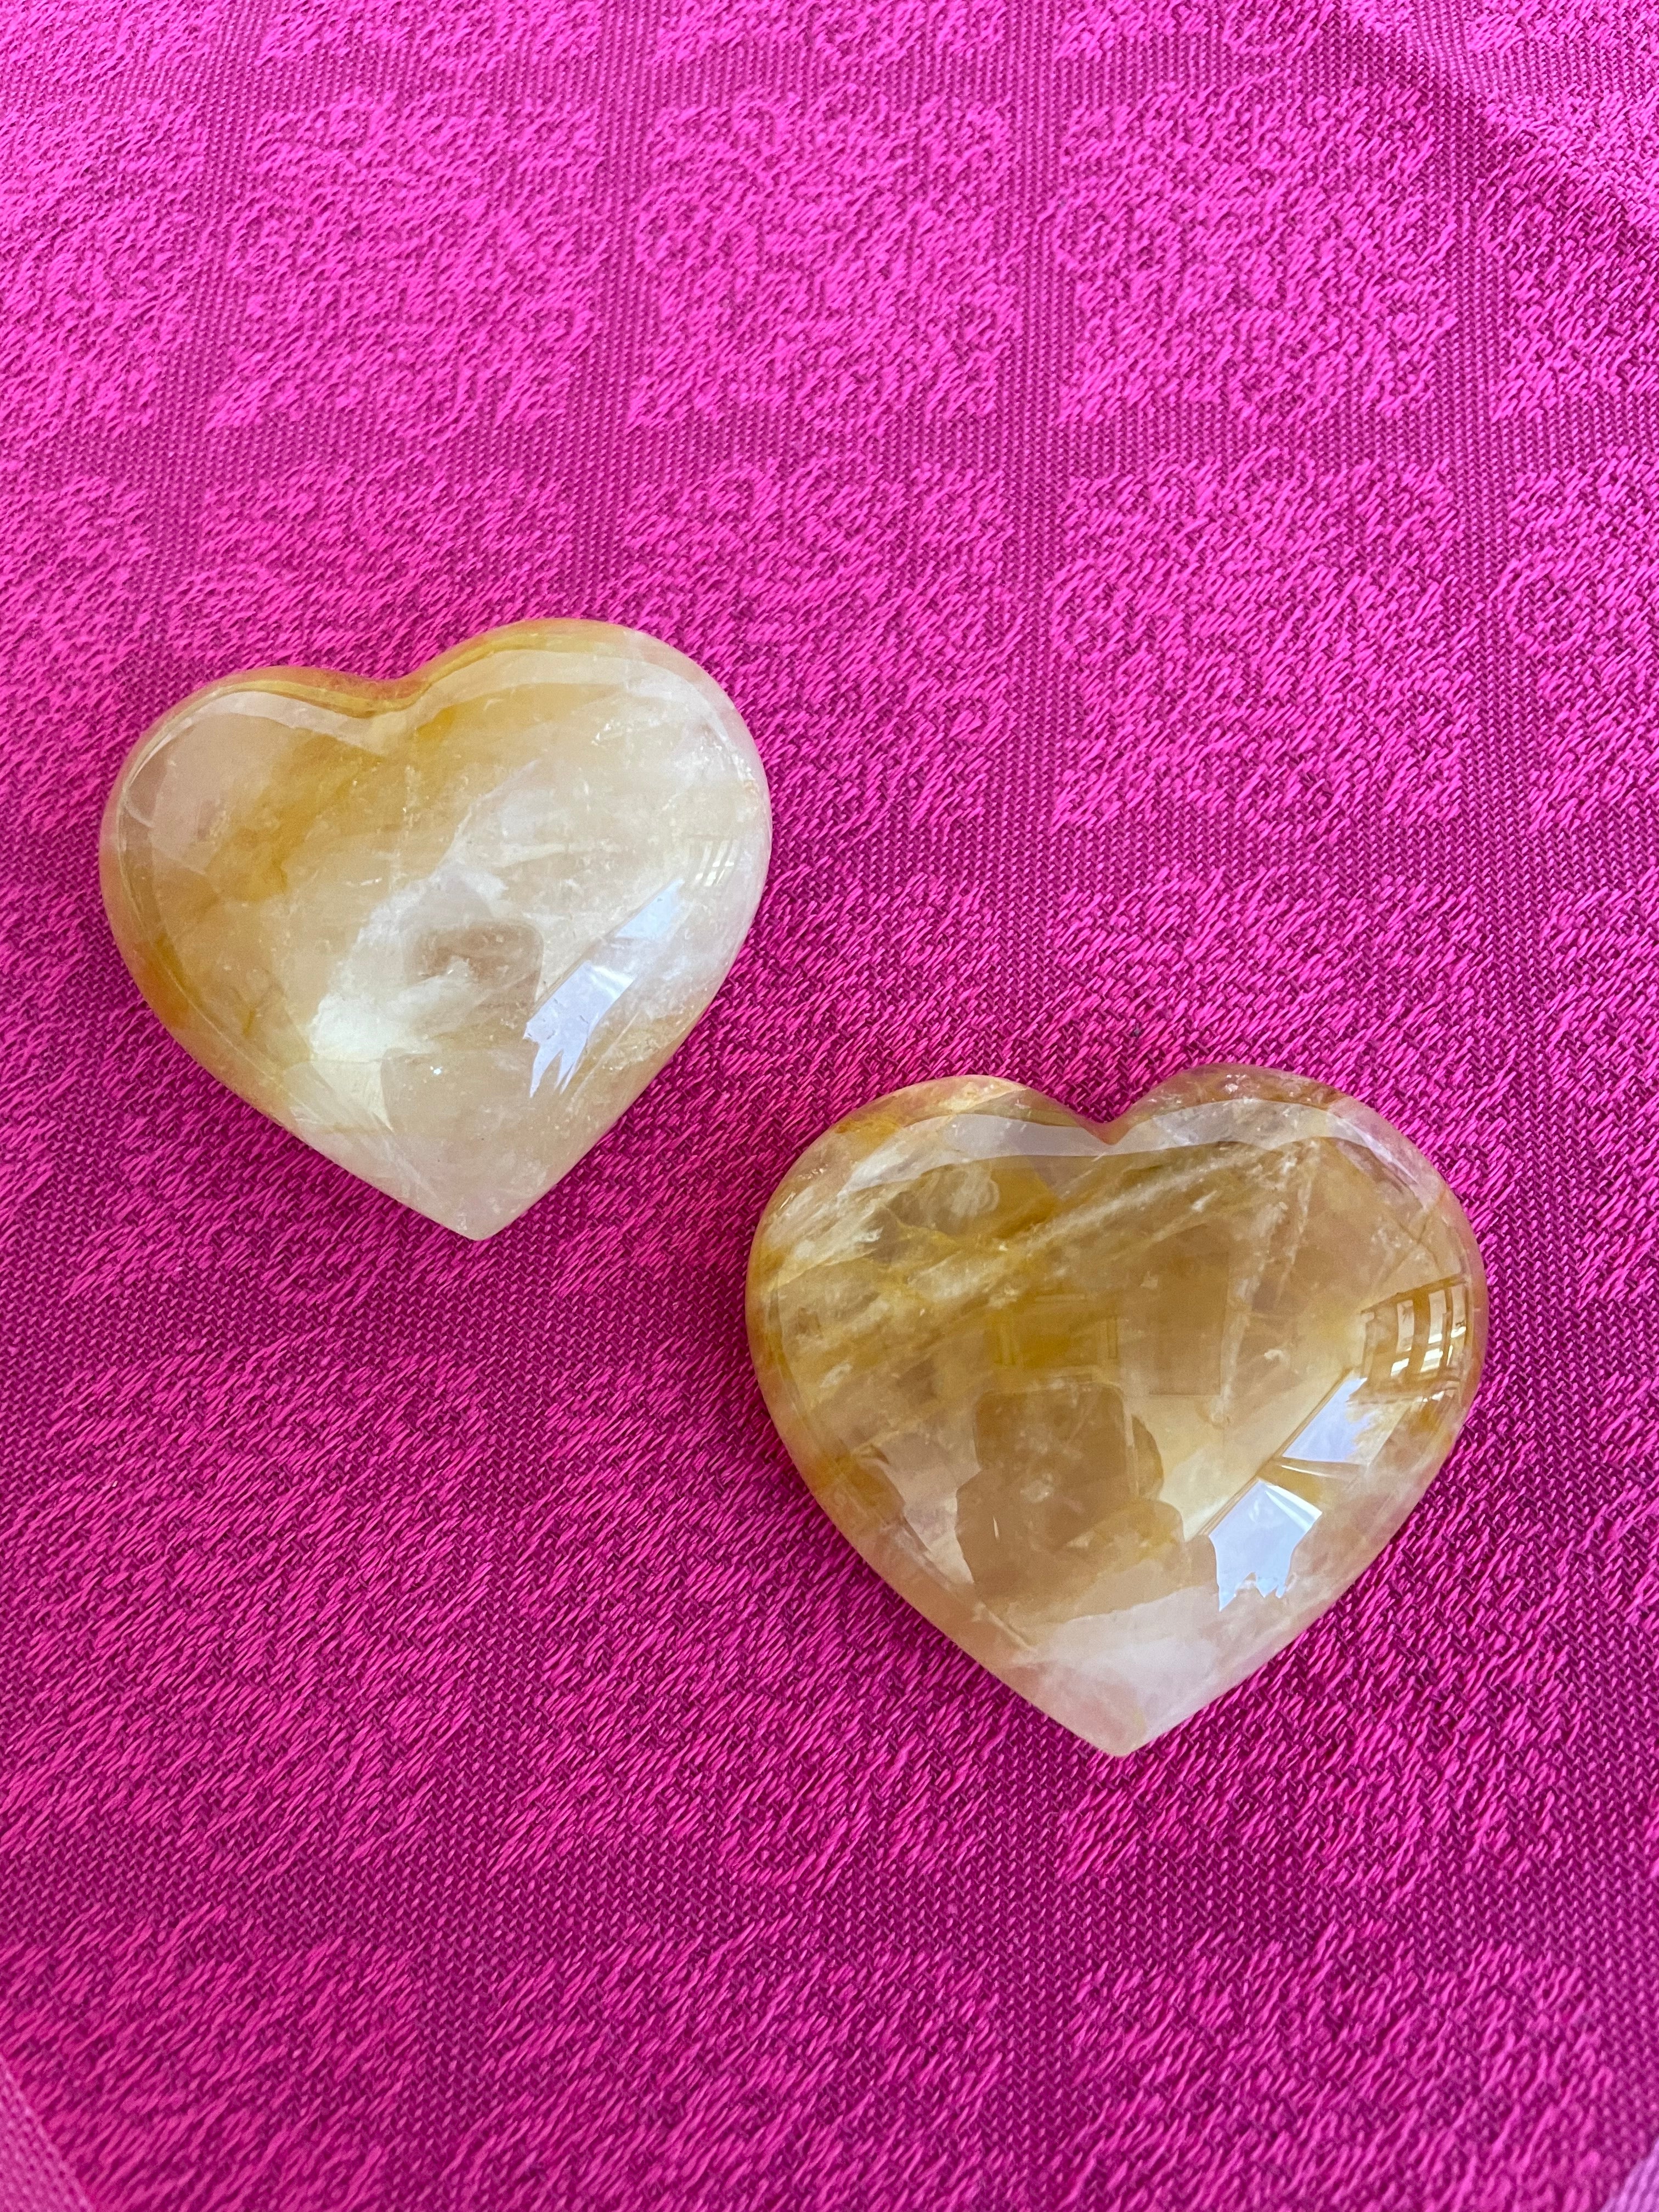 Alternate view. Beautiful citrine heart! Great to place on your altar or bookshelf, to hold during meditation, to use for healing or as a décor item in your home of office. Citrine absorbs and dispels negative energy, is a stone of abundance - attracting money, prosperity and success, is warming & energizing, enhances creativity, brings a positive attitude, is cleansing and more. This citrine heart is approximately 2" at it's widest expanse. Cost $22.